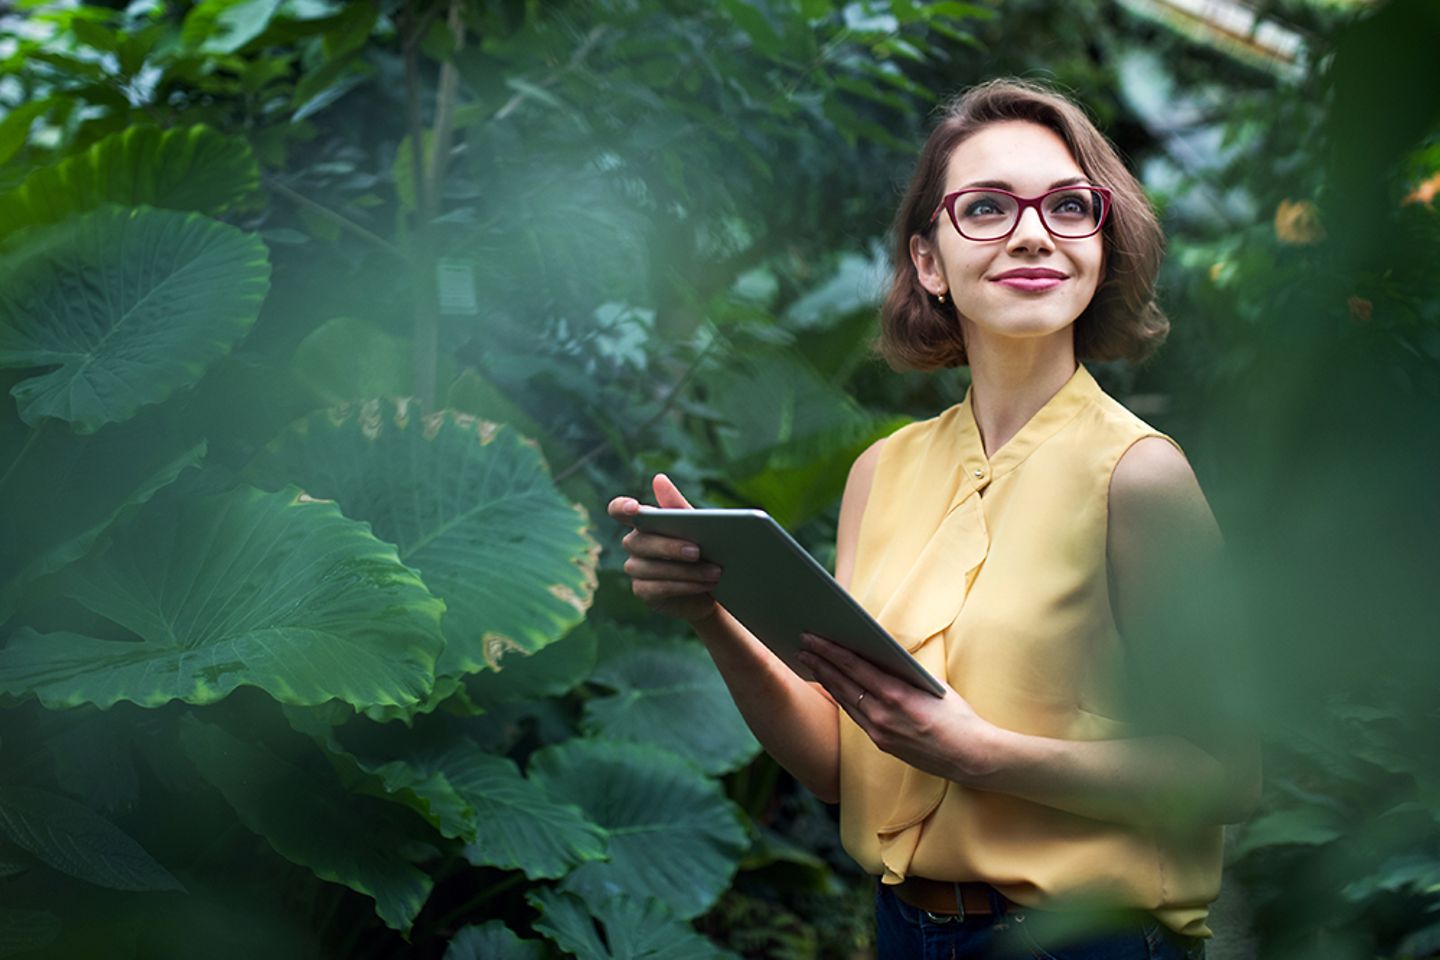 Smiling woman with tab in hand, surrounded by plants